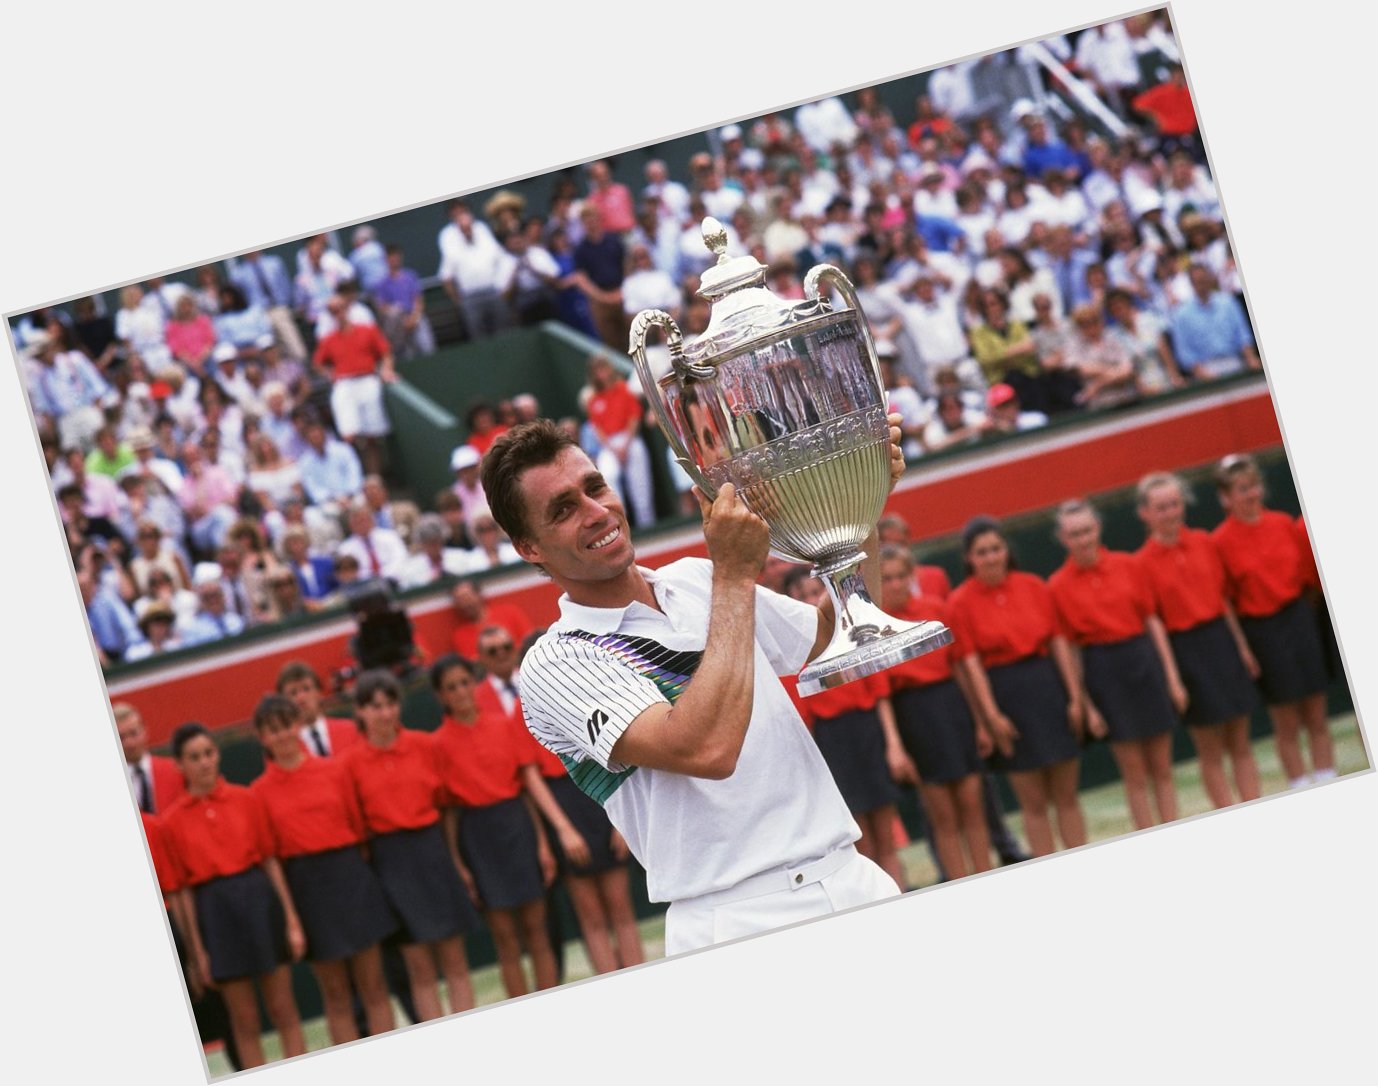 Happy birthday to our 2-time champion Ivan Lendl, who turns 58 today! 